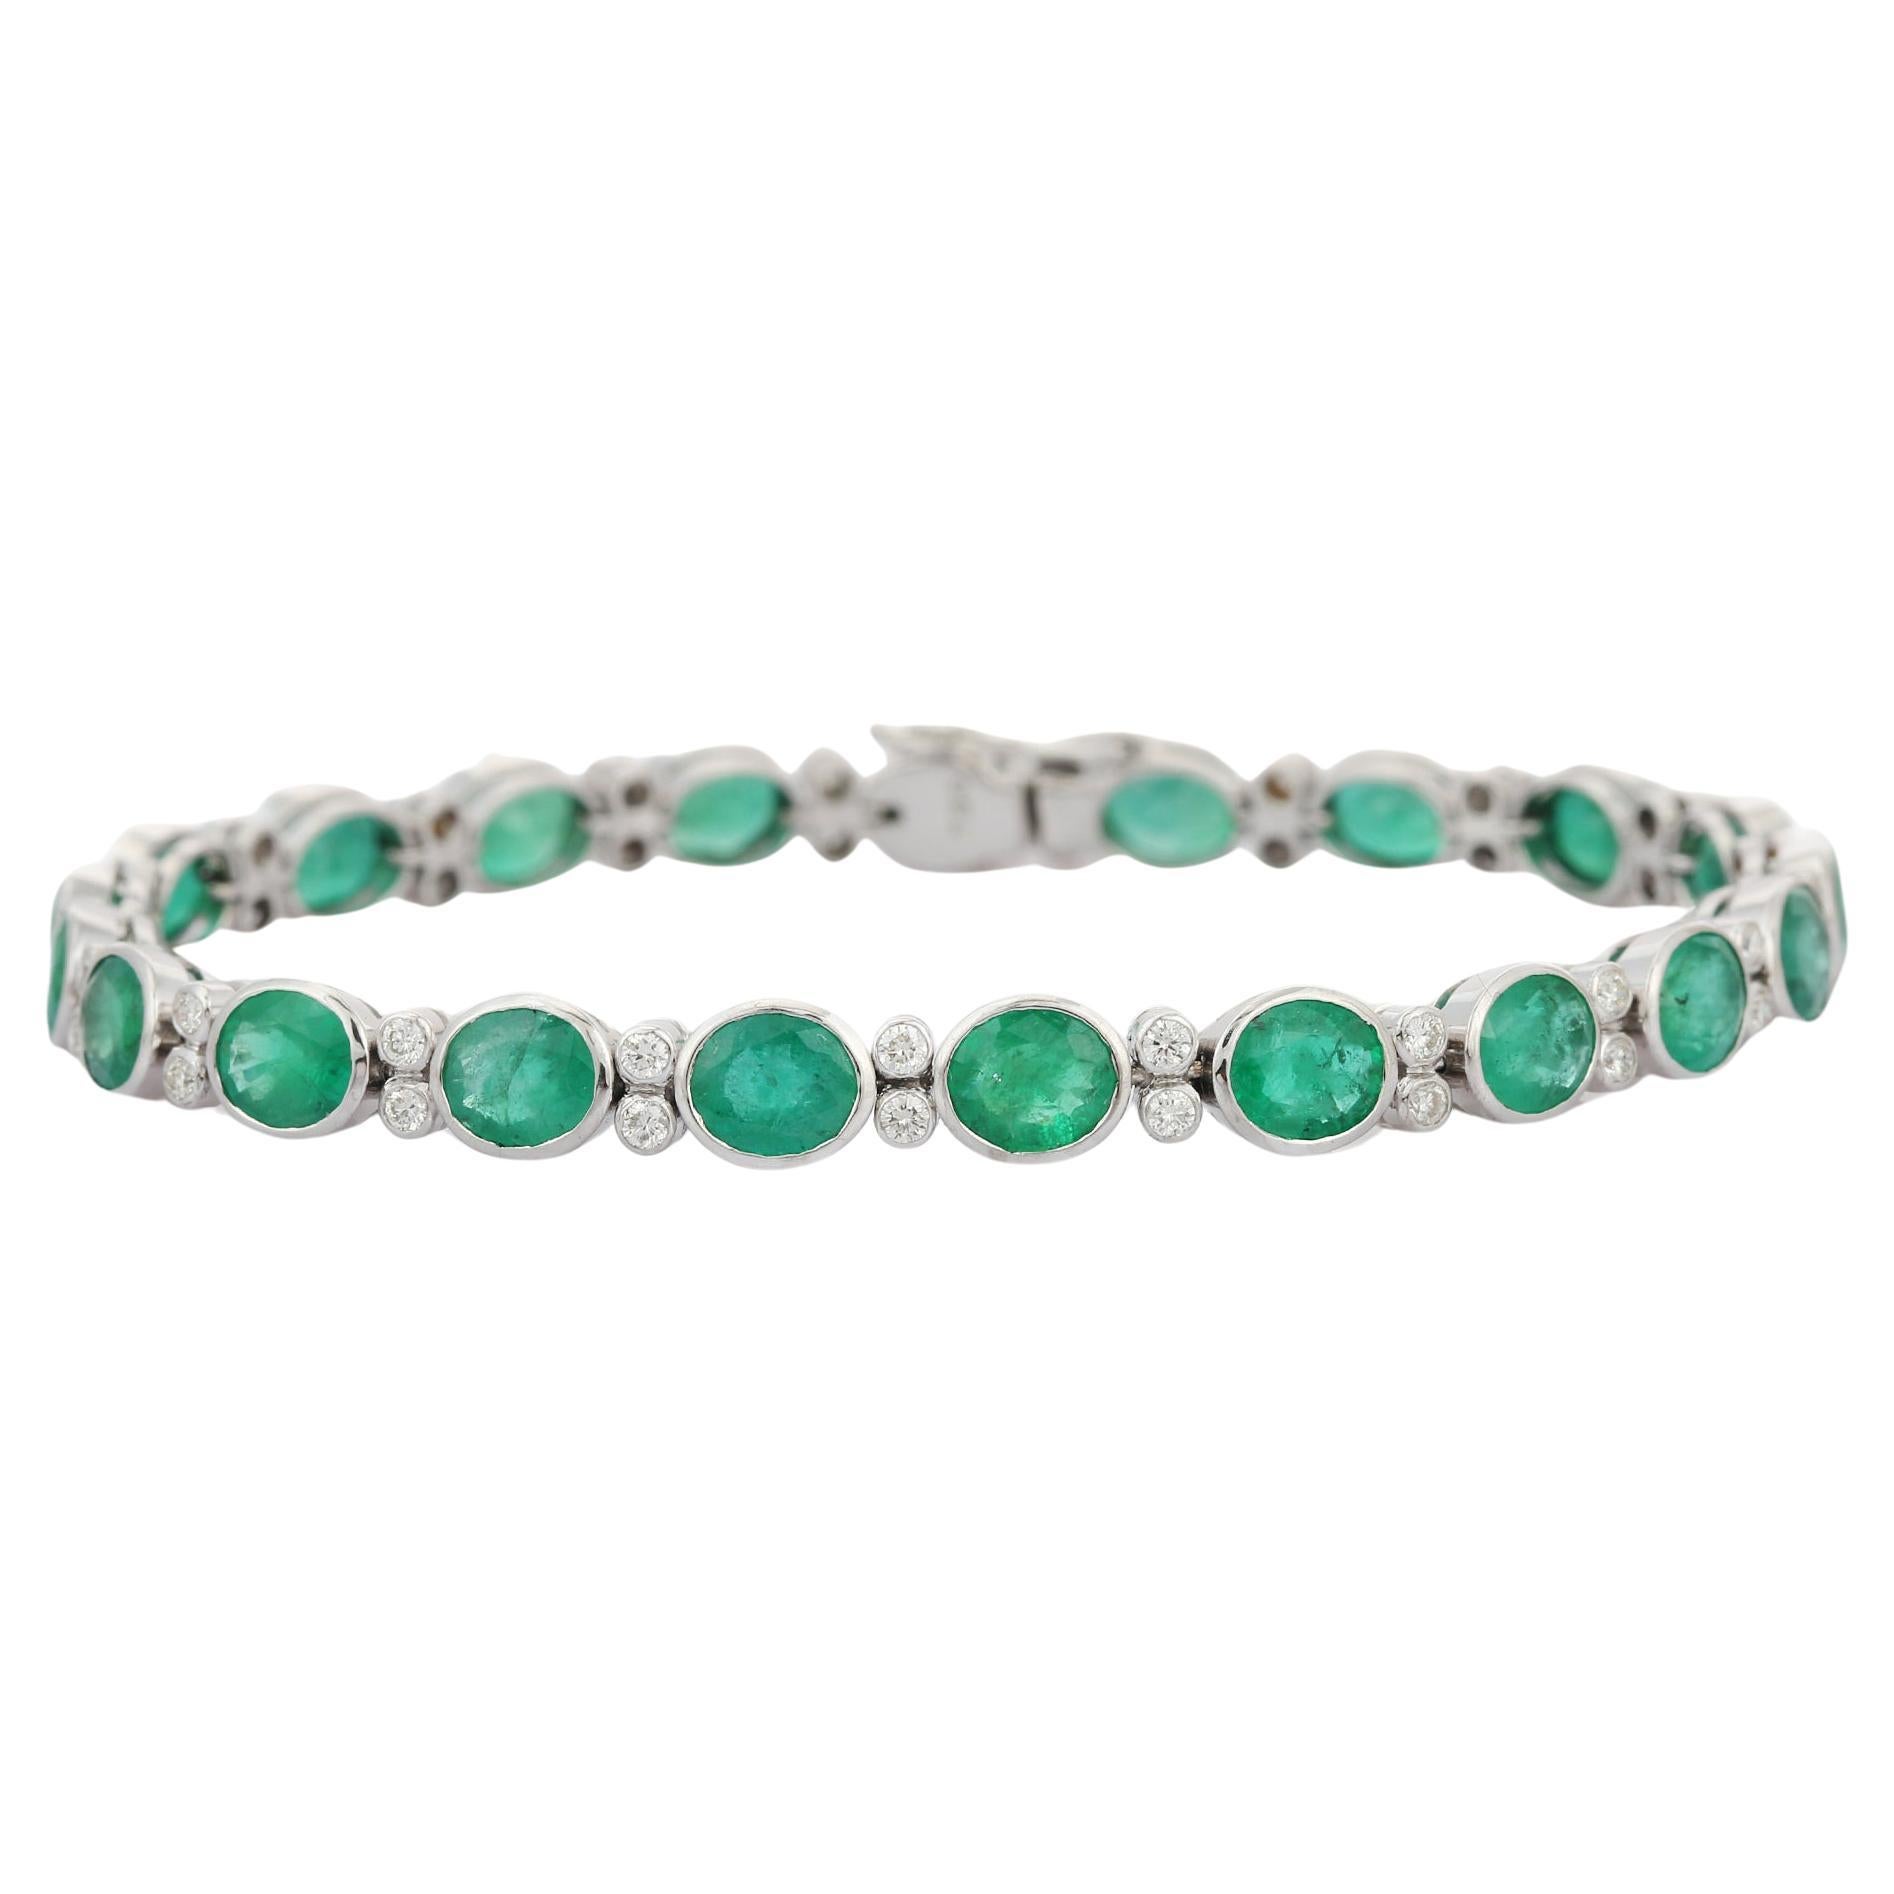 Impeccable Art Deco Style Emerald and Diamond Bracelet in 18 Karat White Gold   For Sale